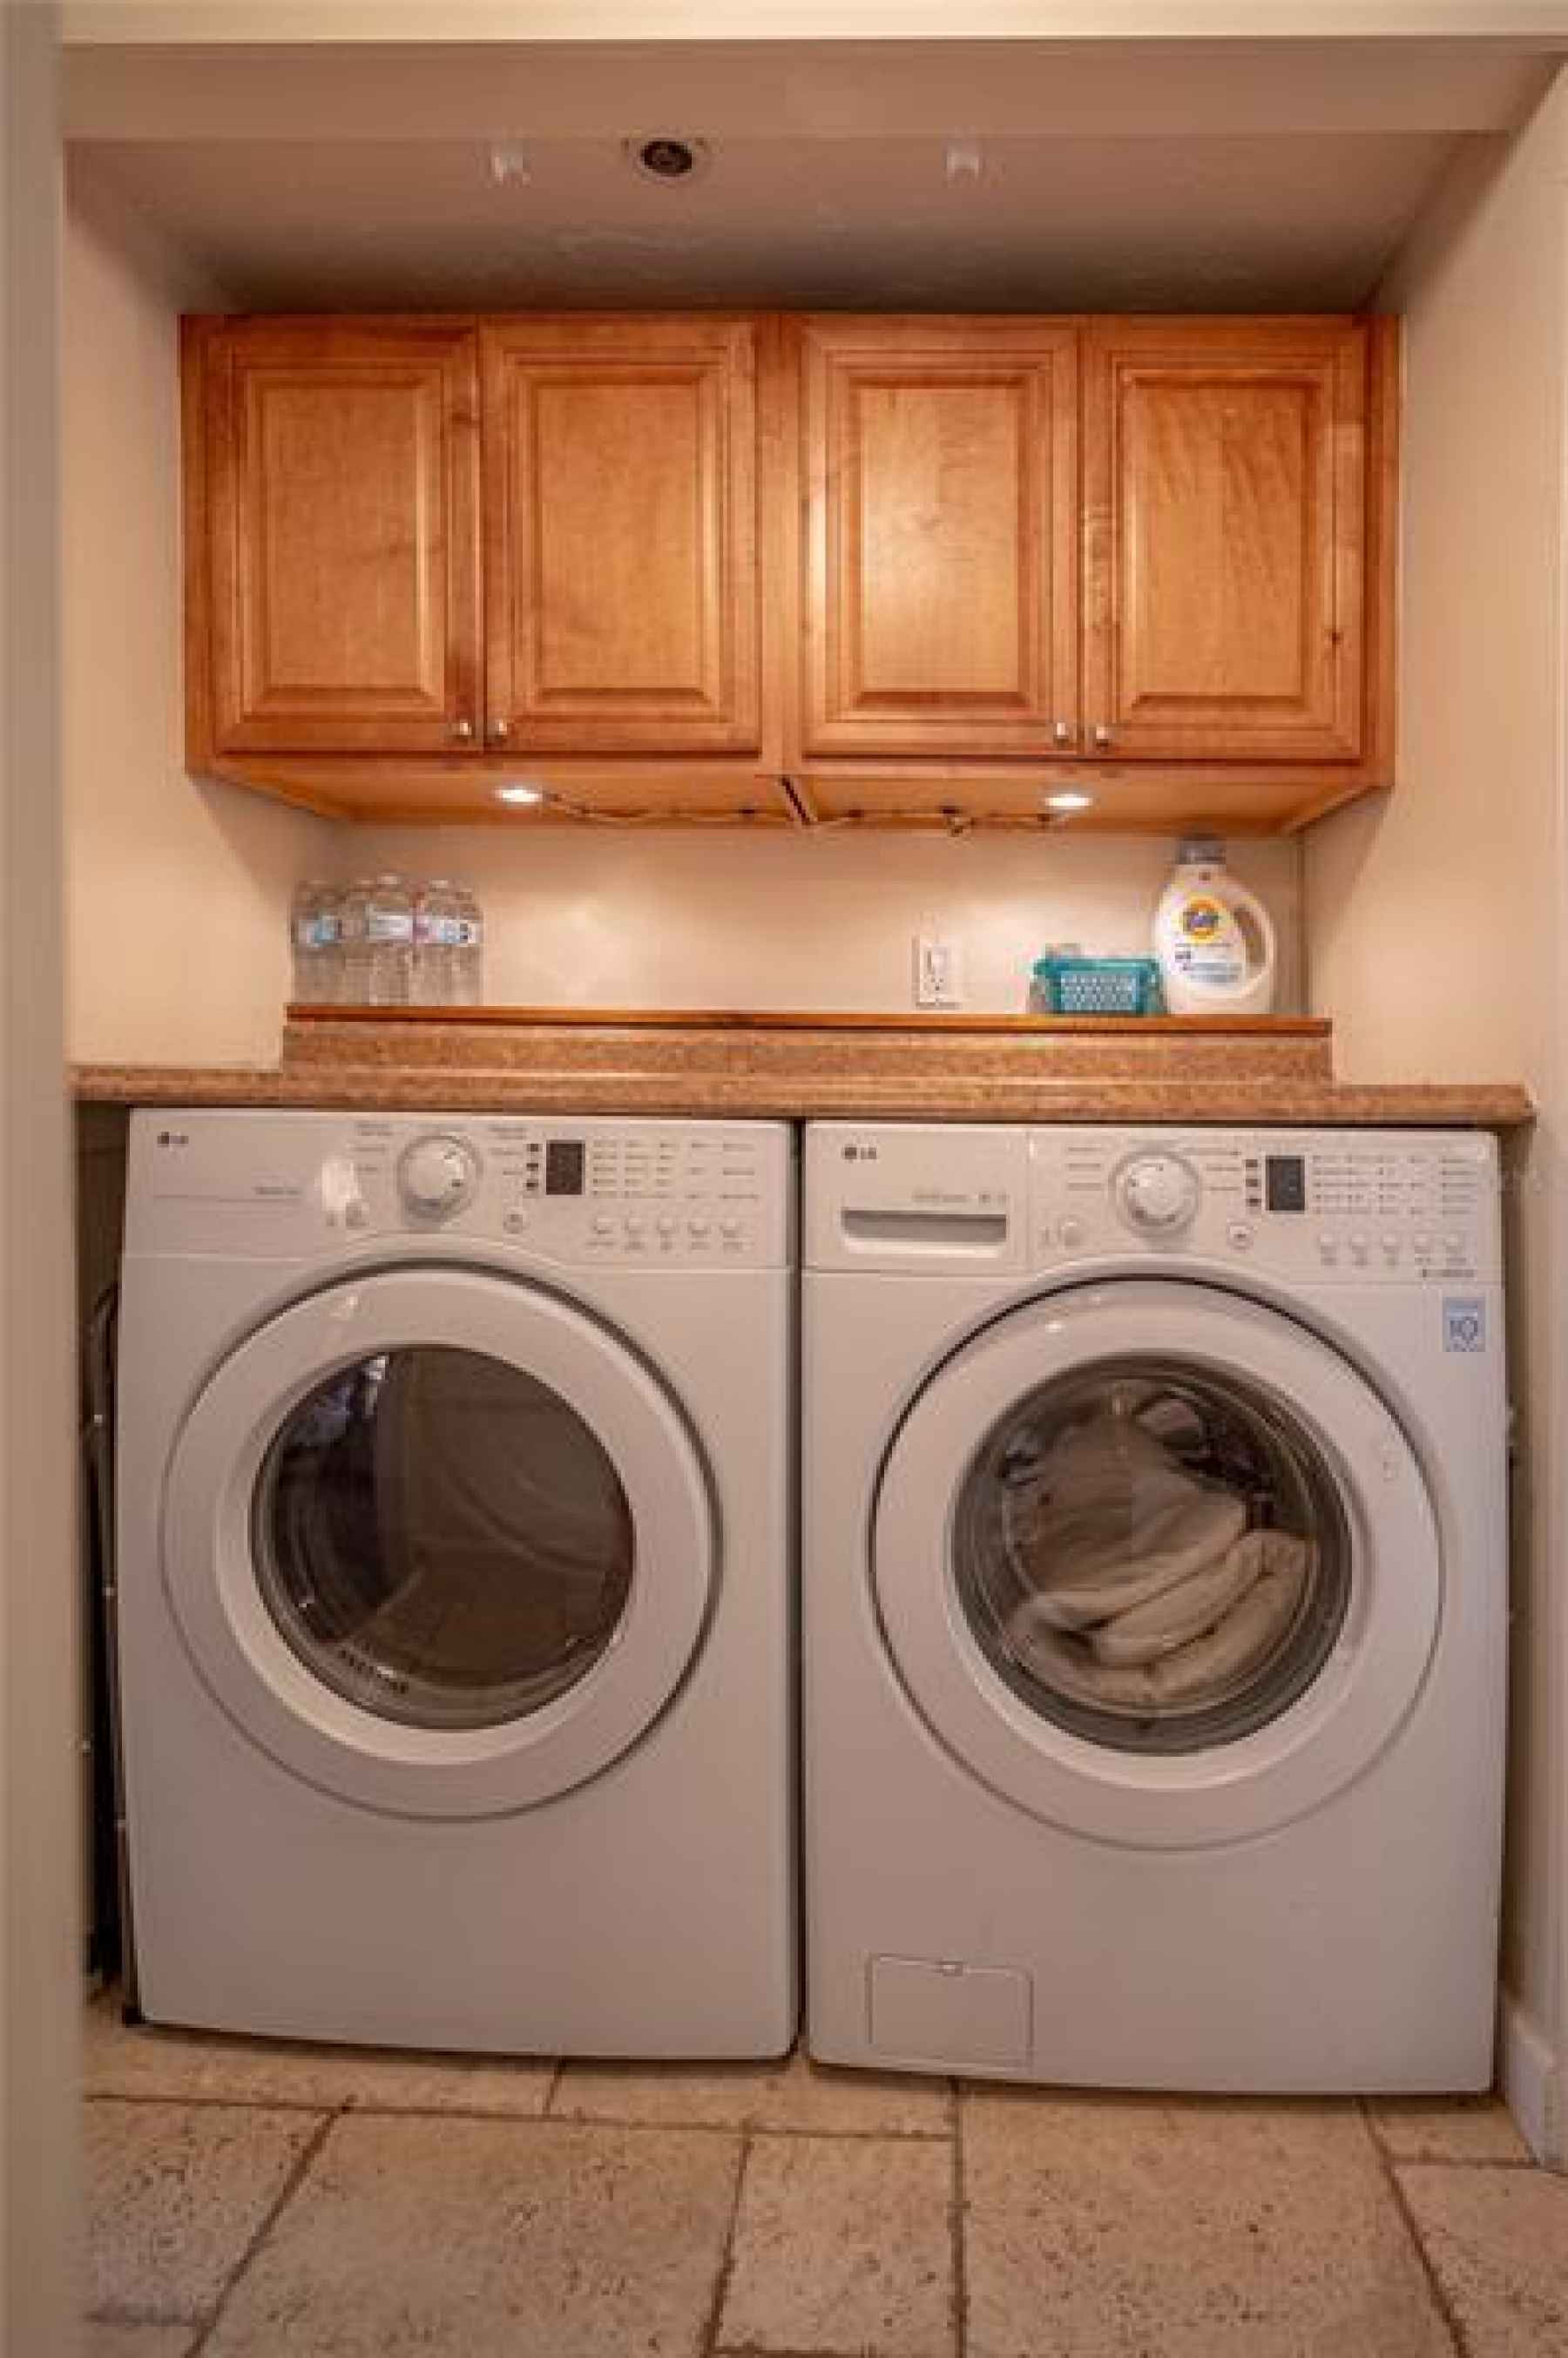 Washer dryer area